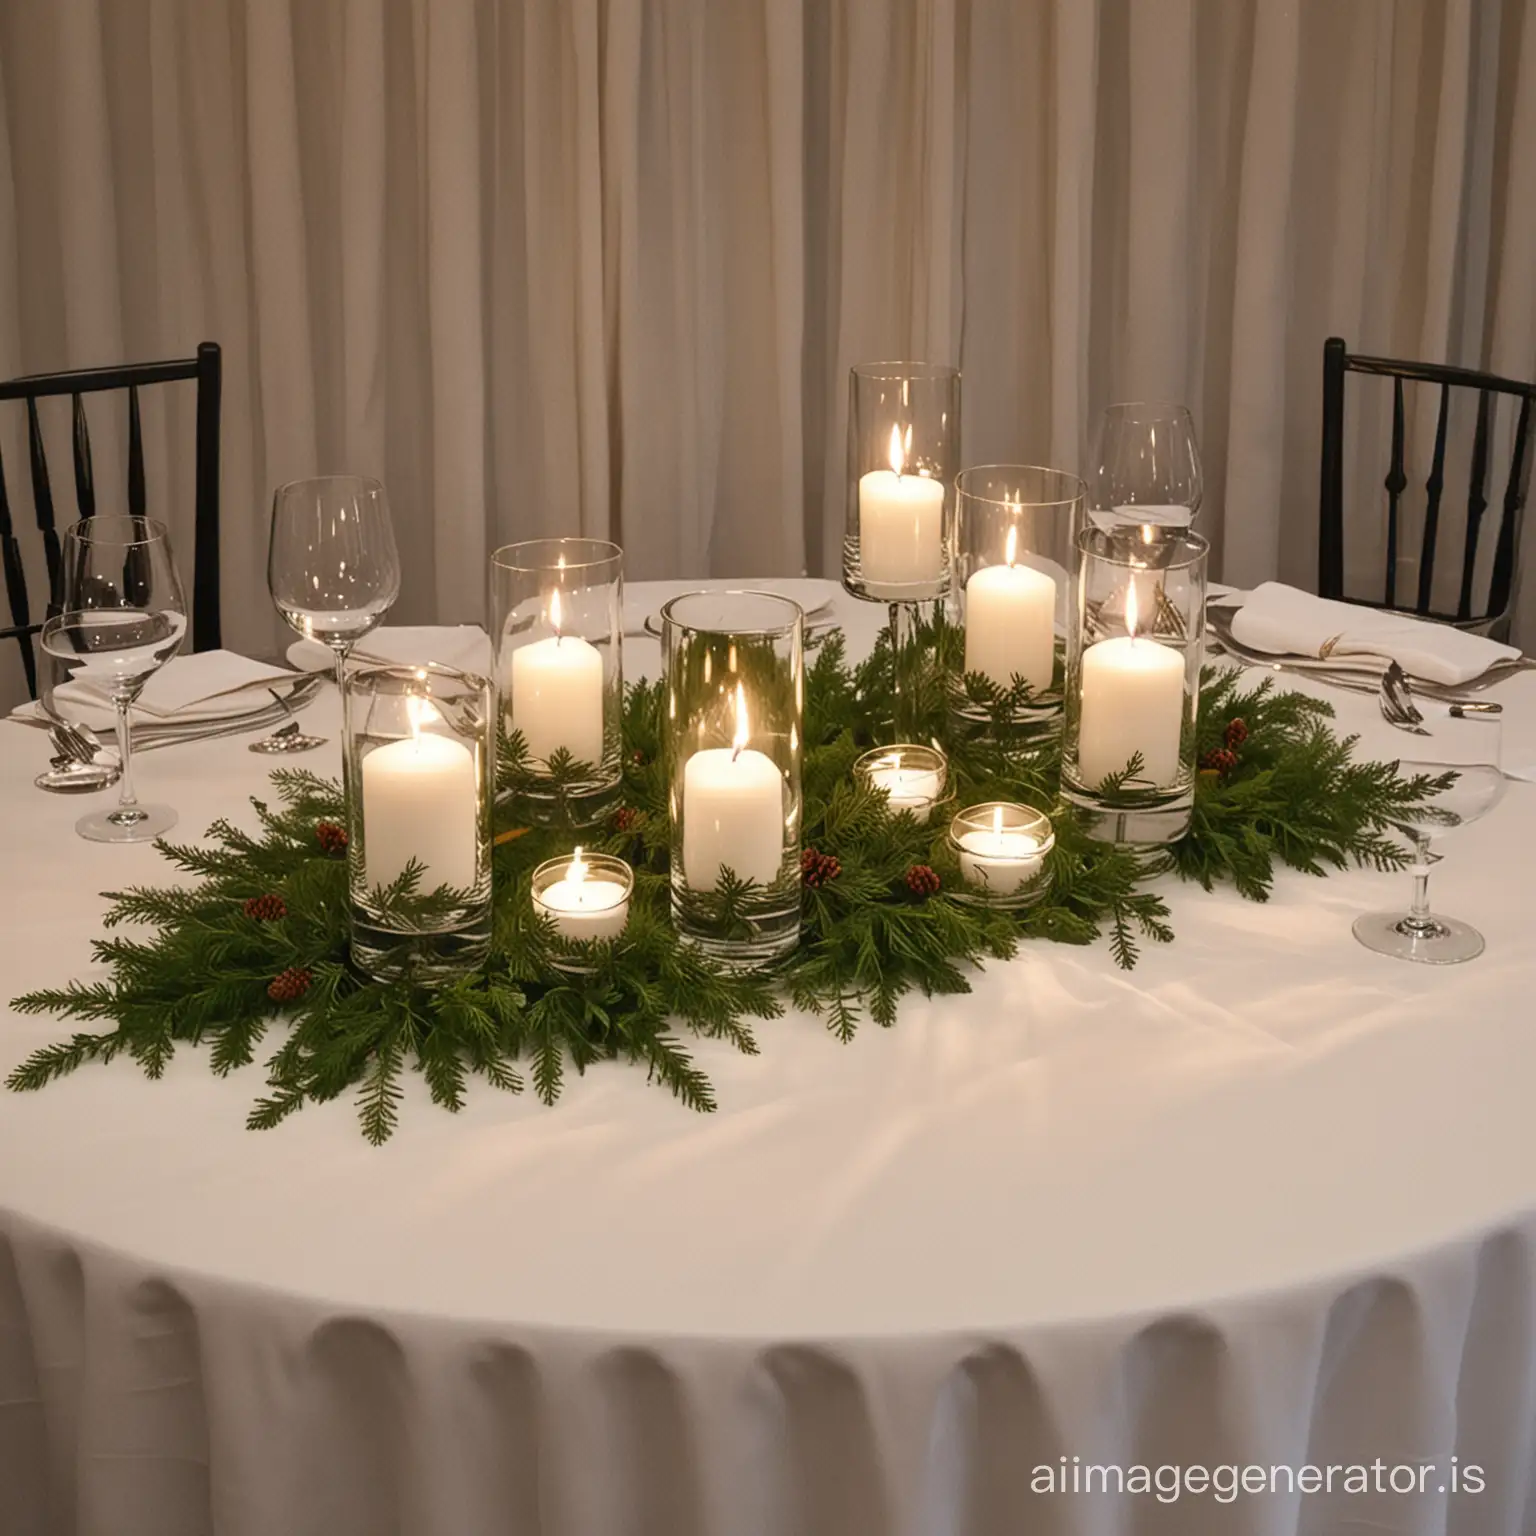 Elegant-Wedding-Table-Setting-with-TriLevel-Wine-Glass-Candle-Centerpiece-and-Evergreen-Rings